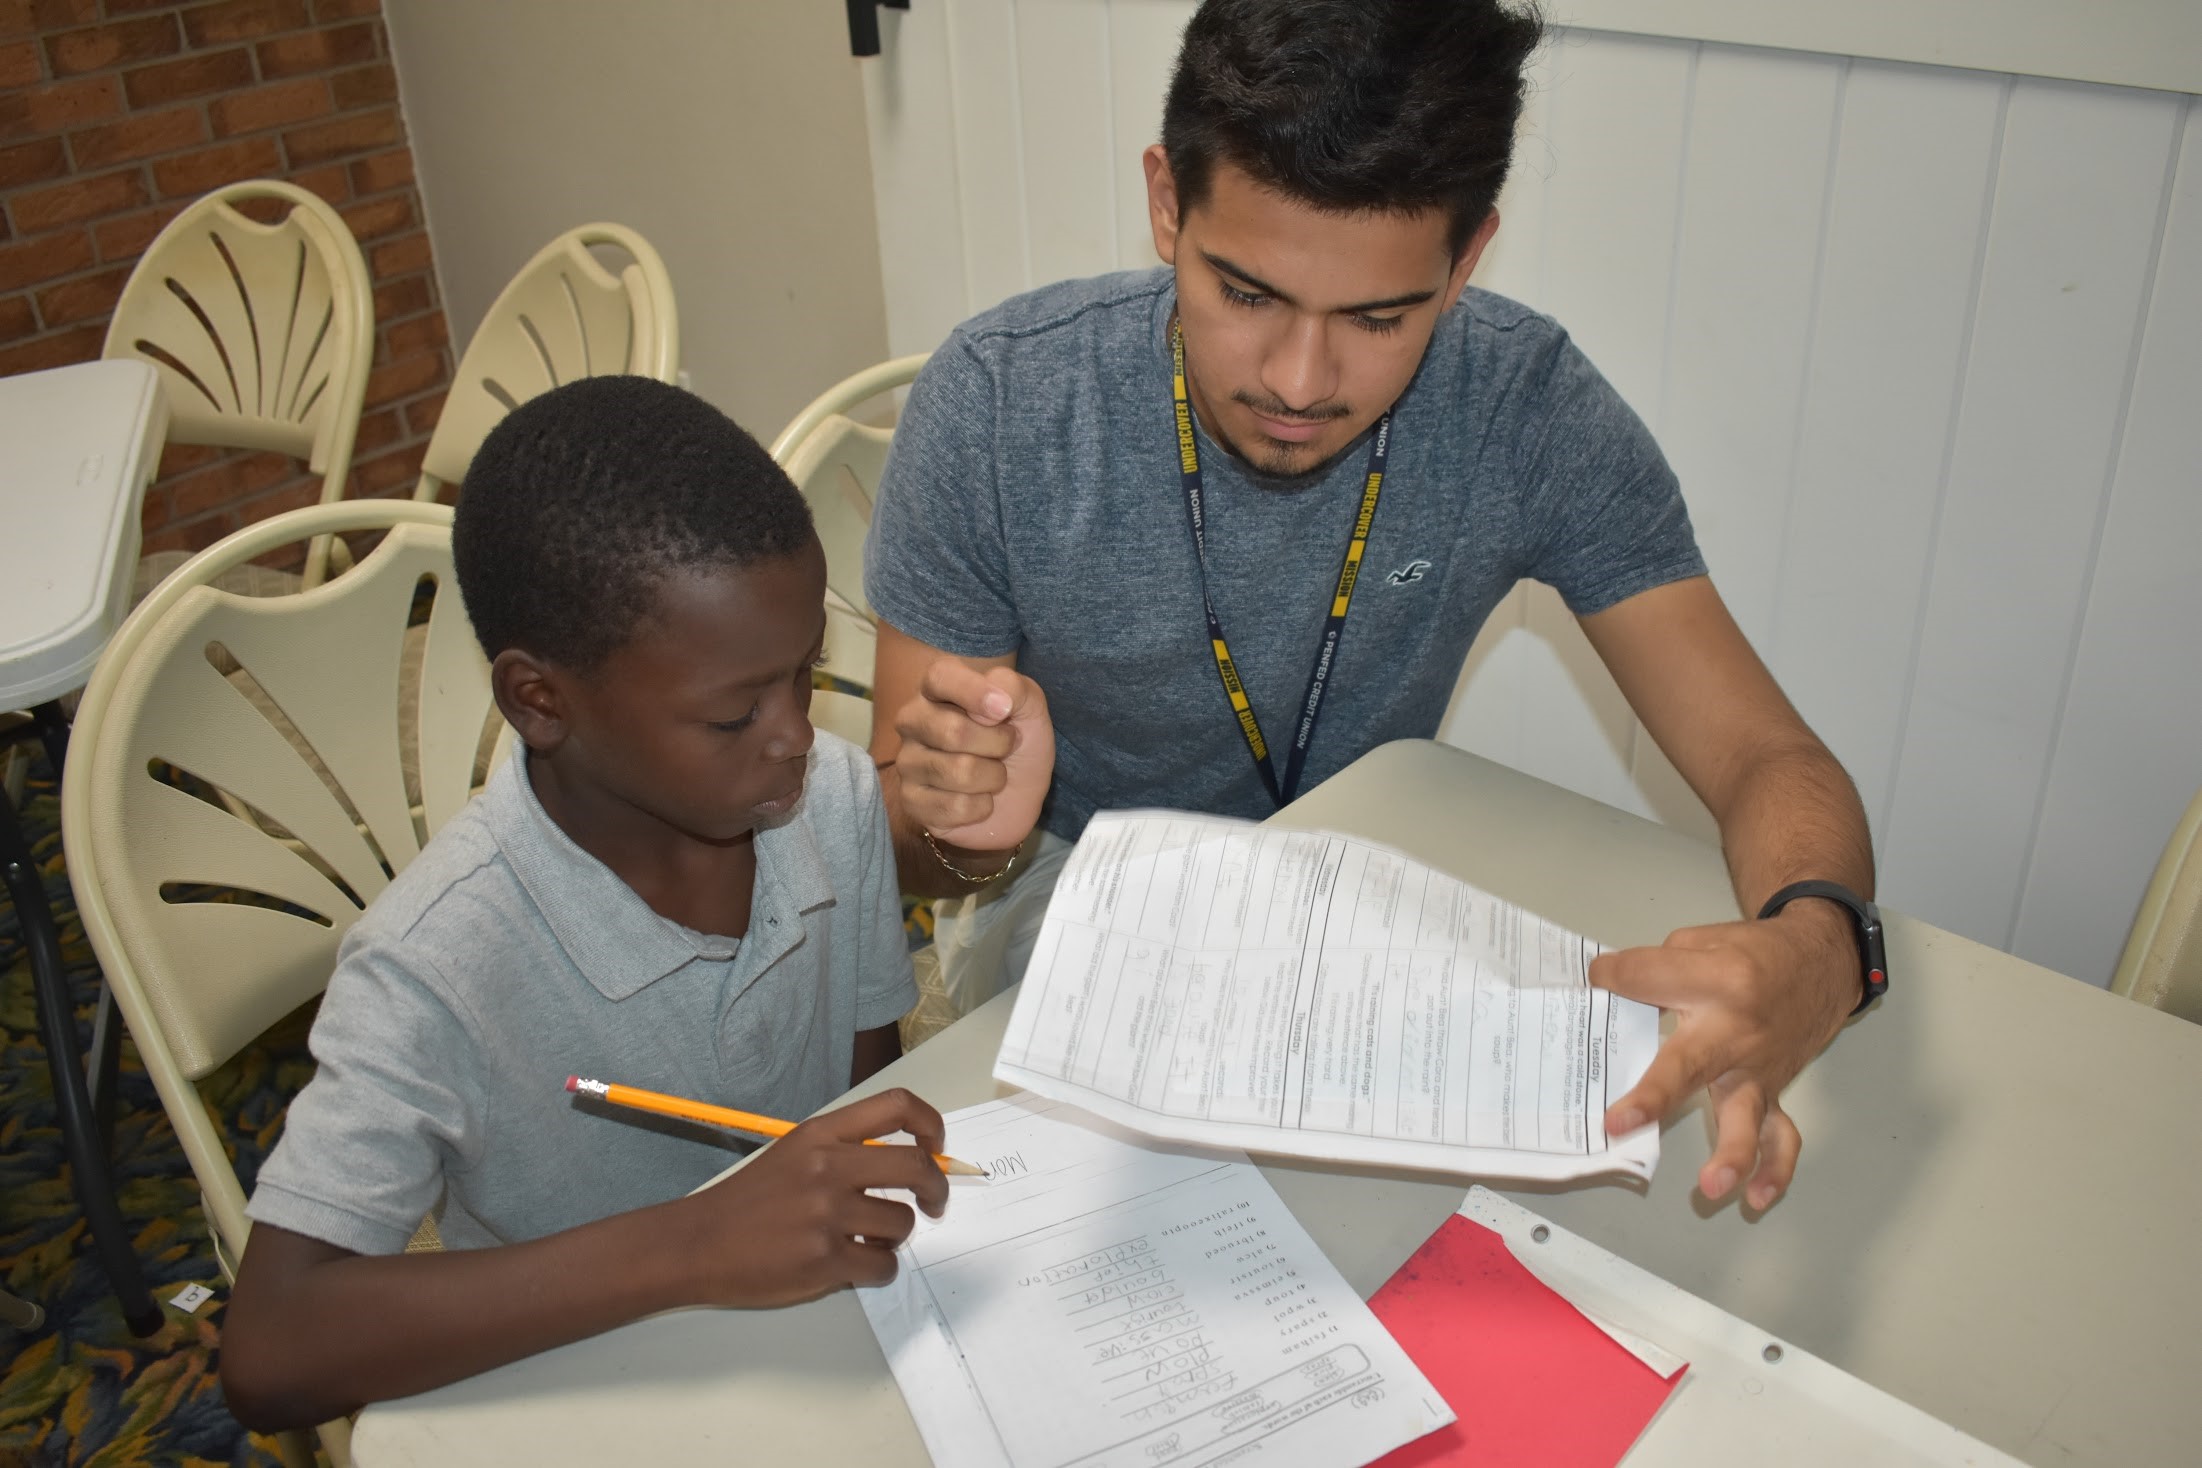 A First Serve Pal mentor works with mentee on homework